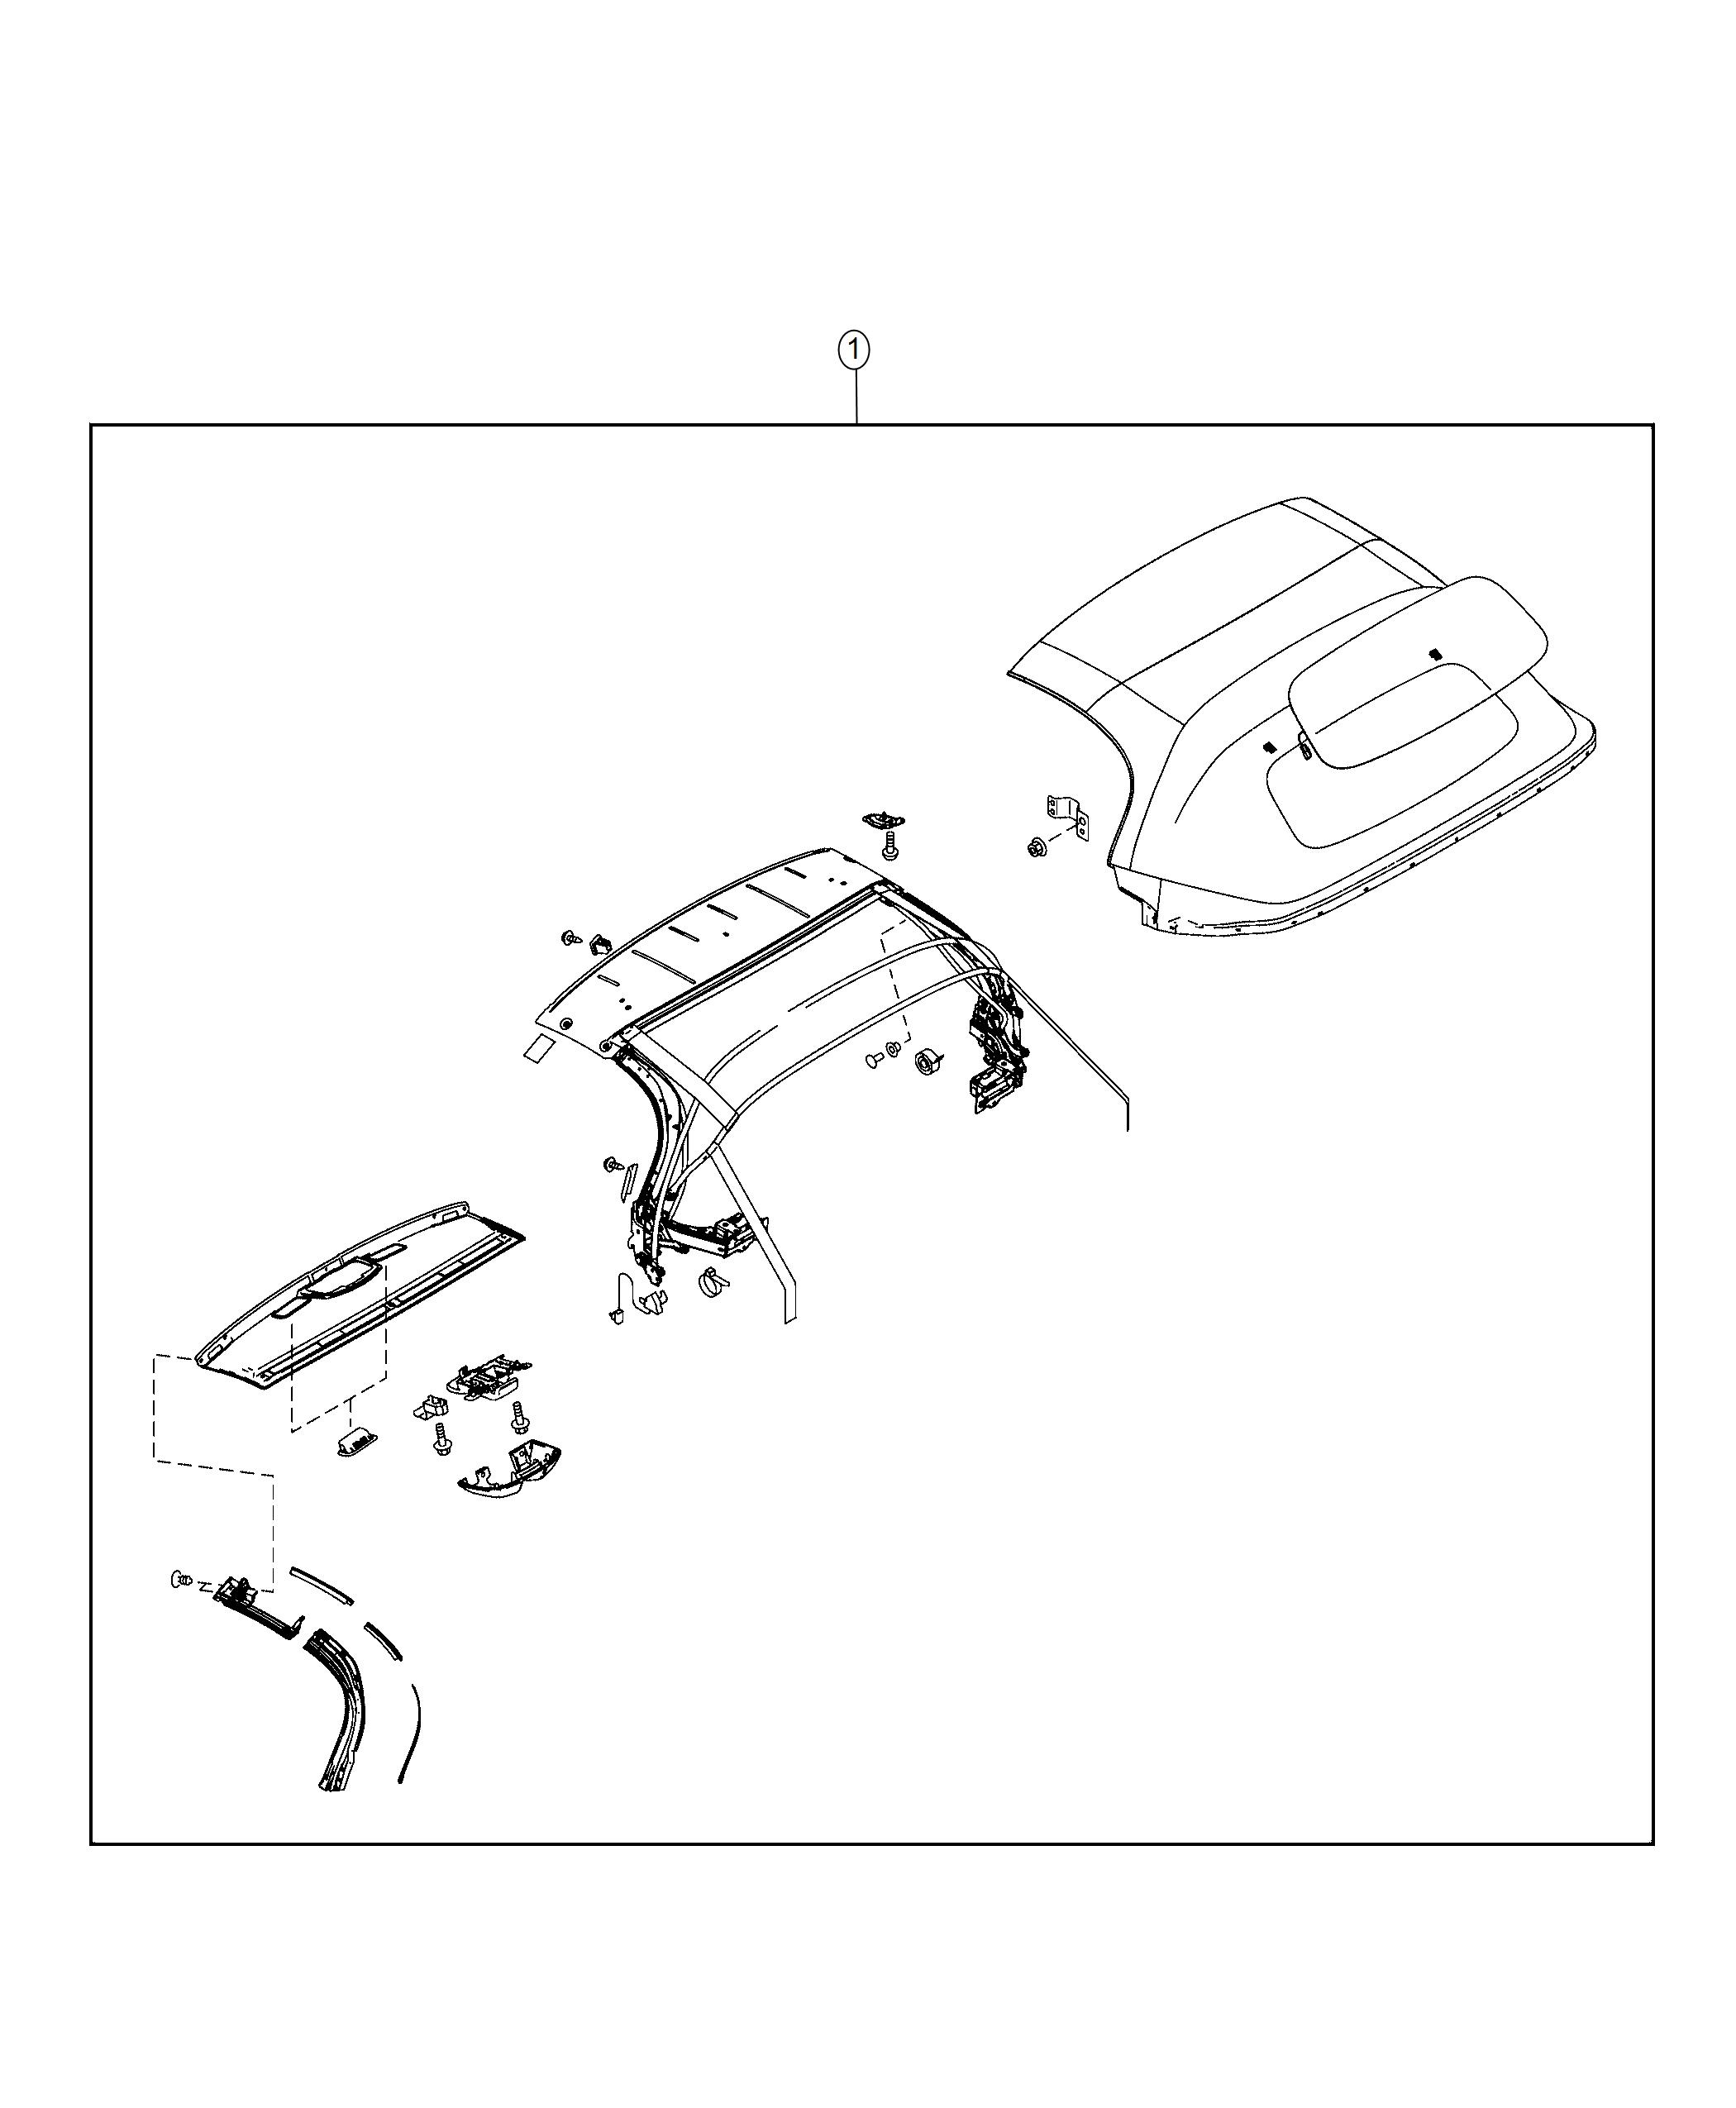 Convertible Top Assembly. Diagram